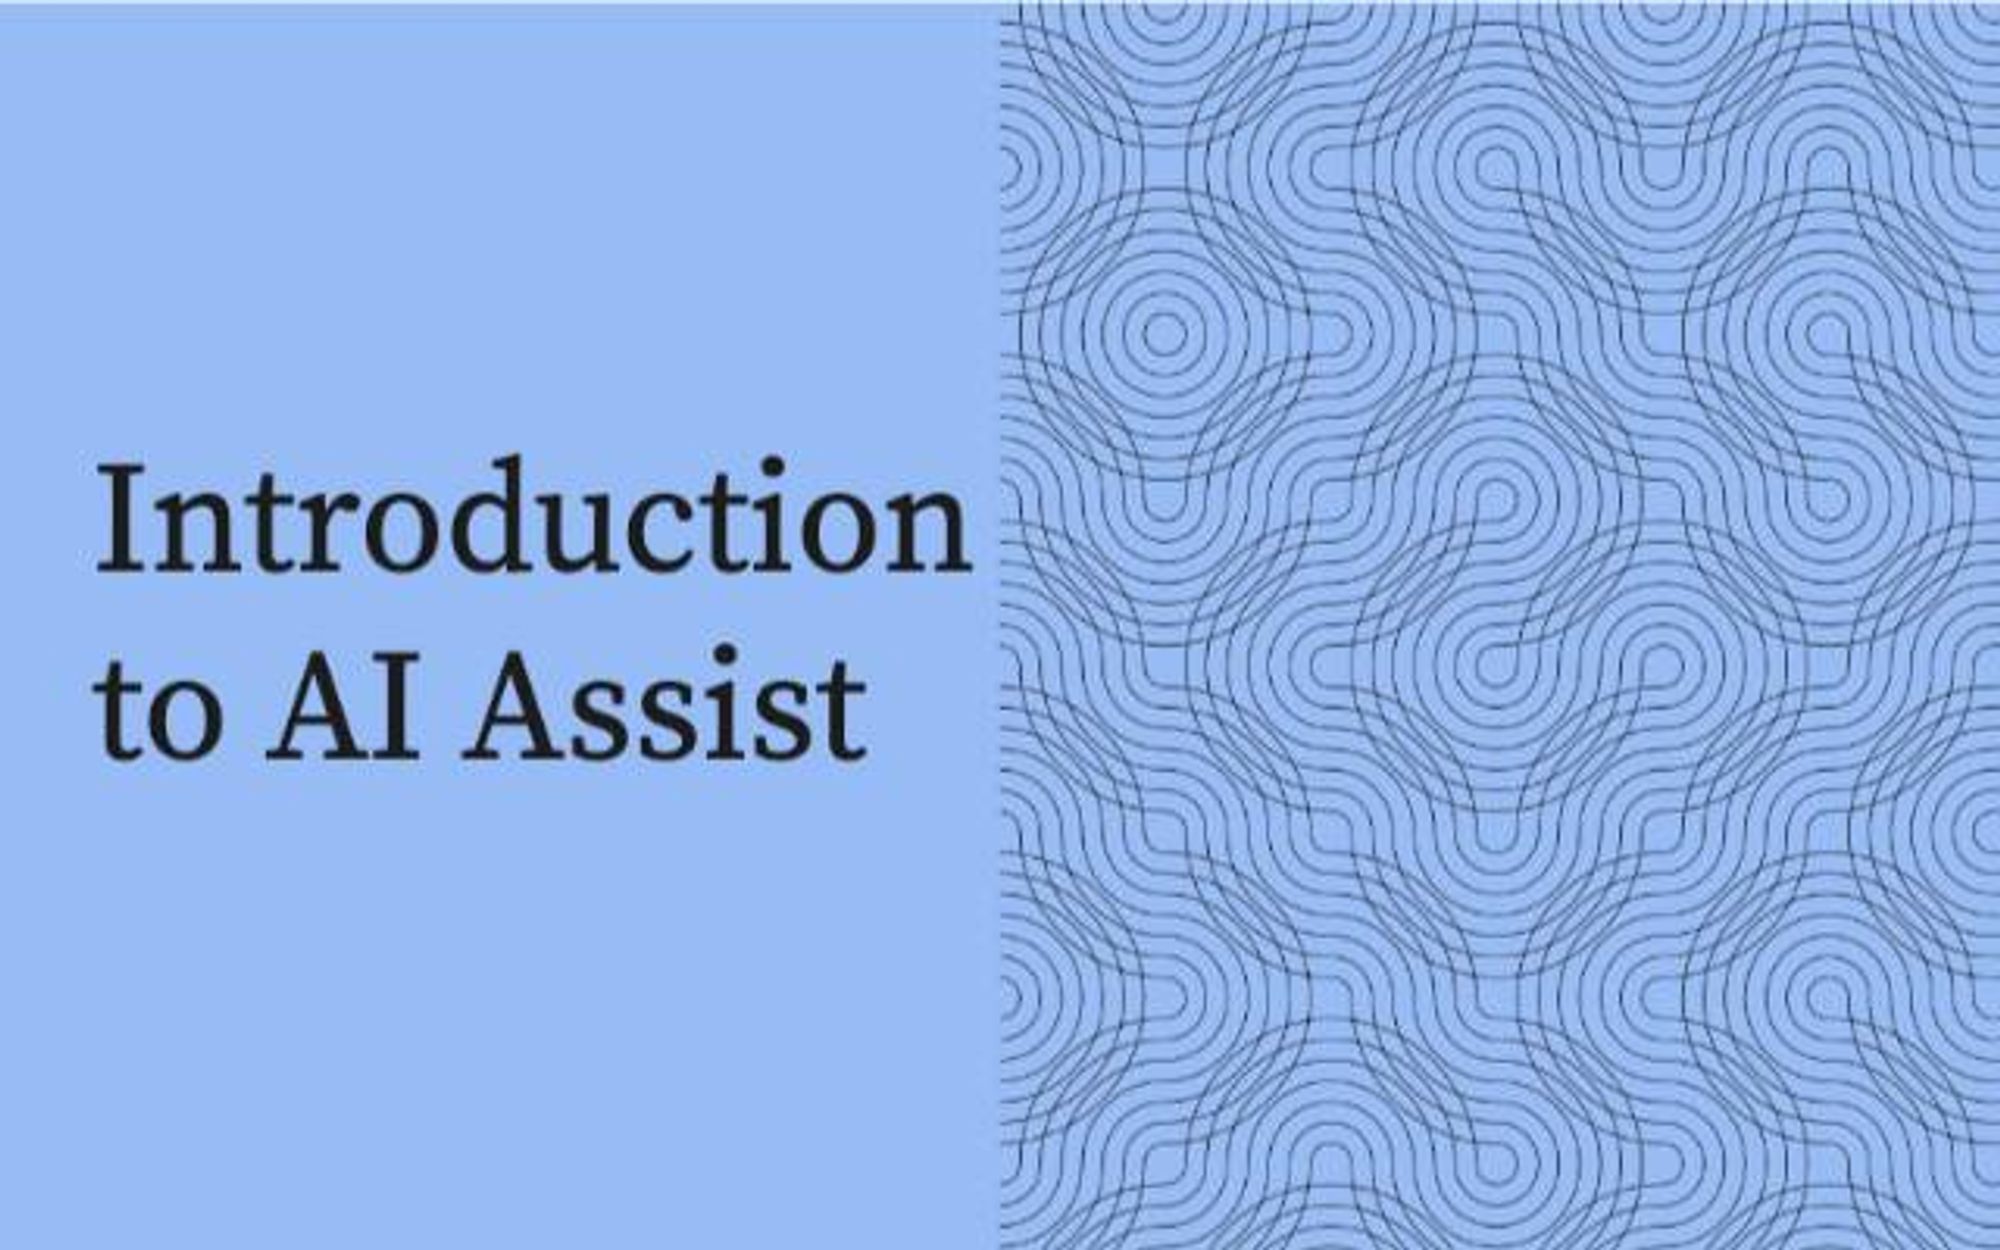 Introduction to AI Assist